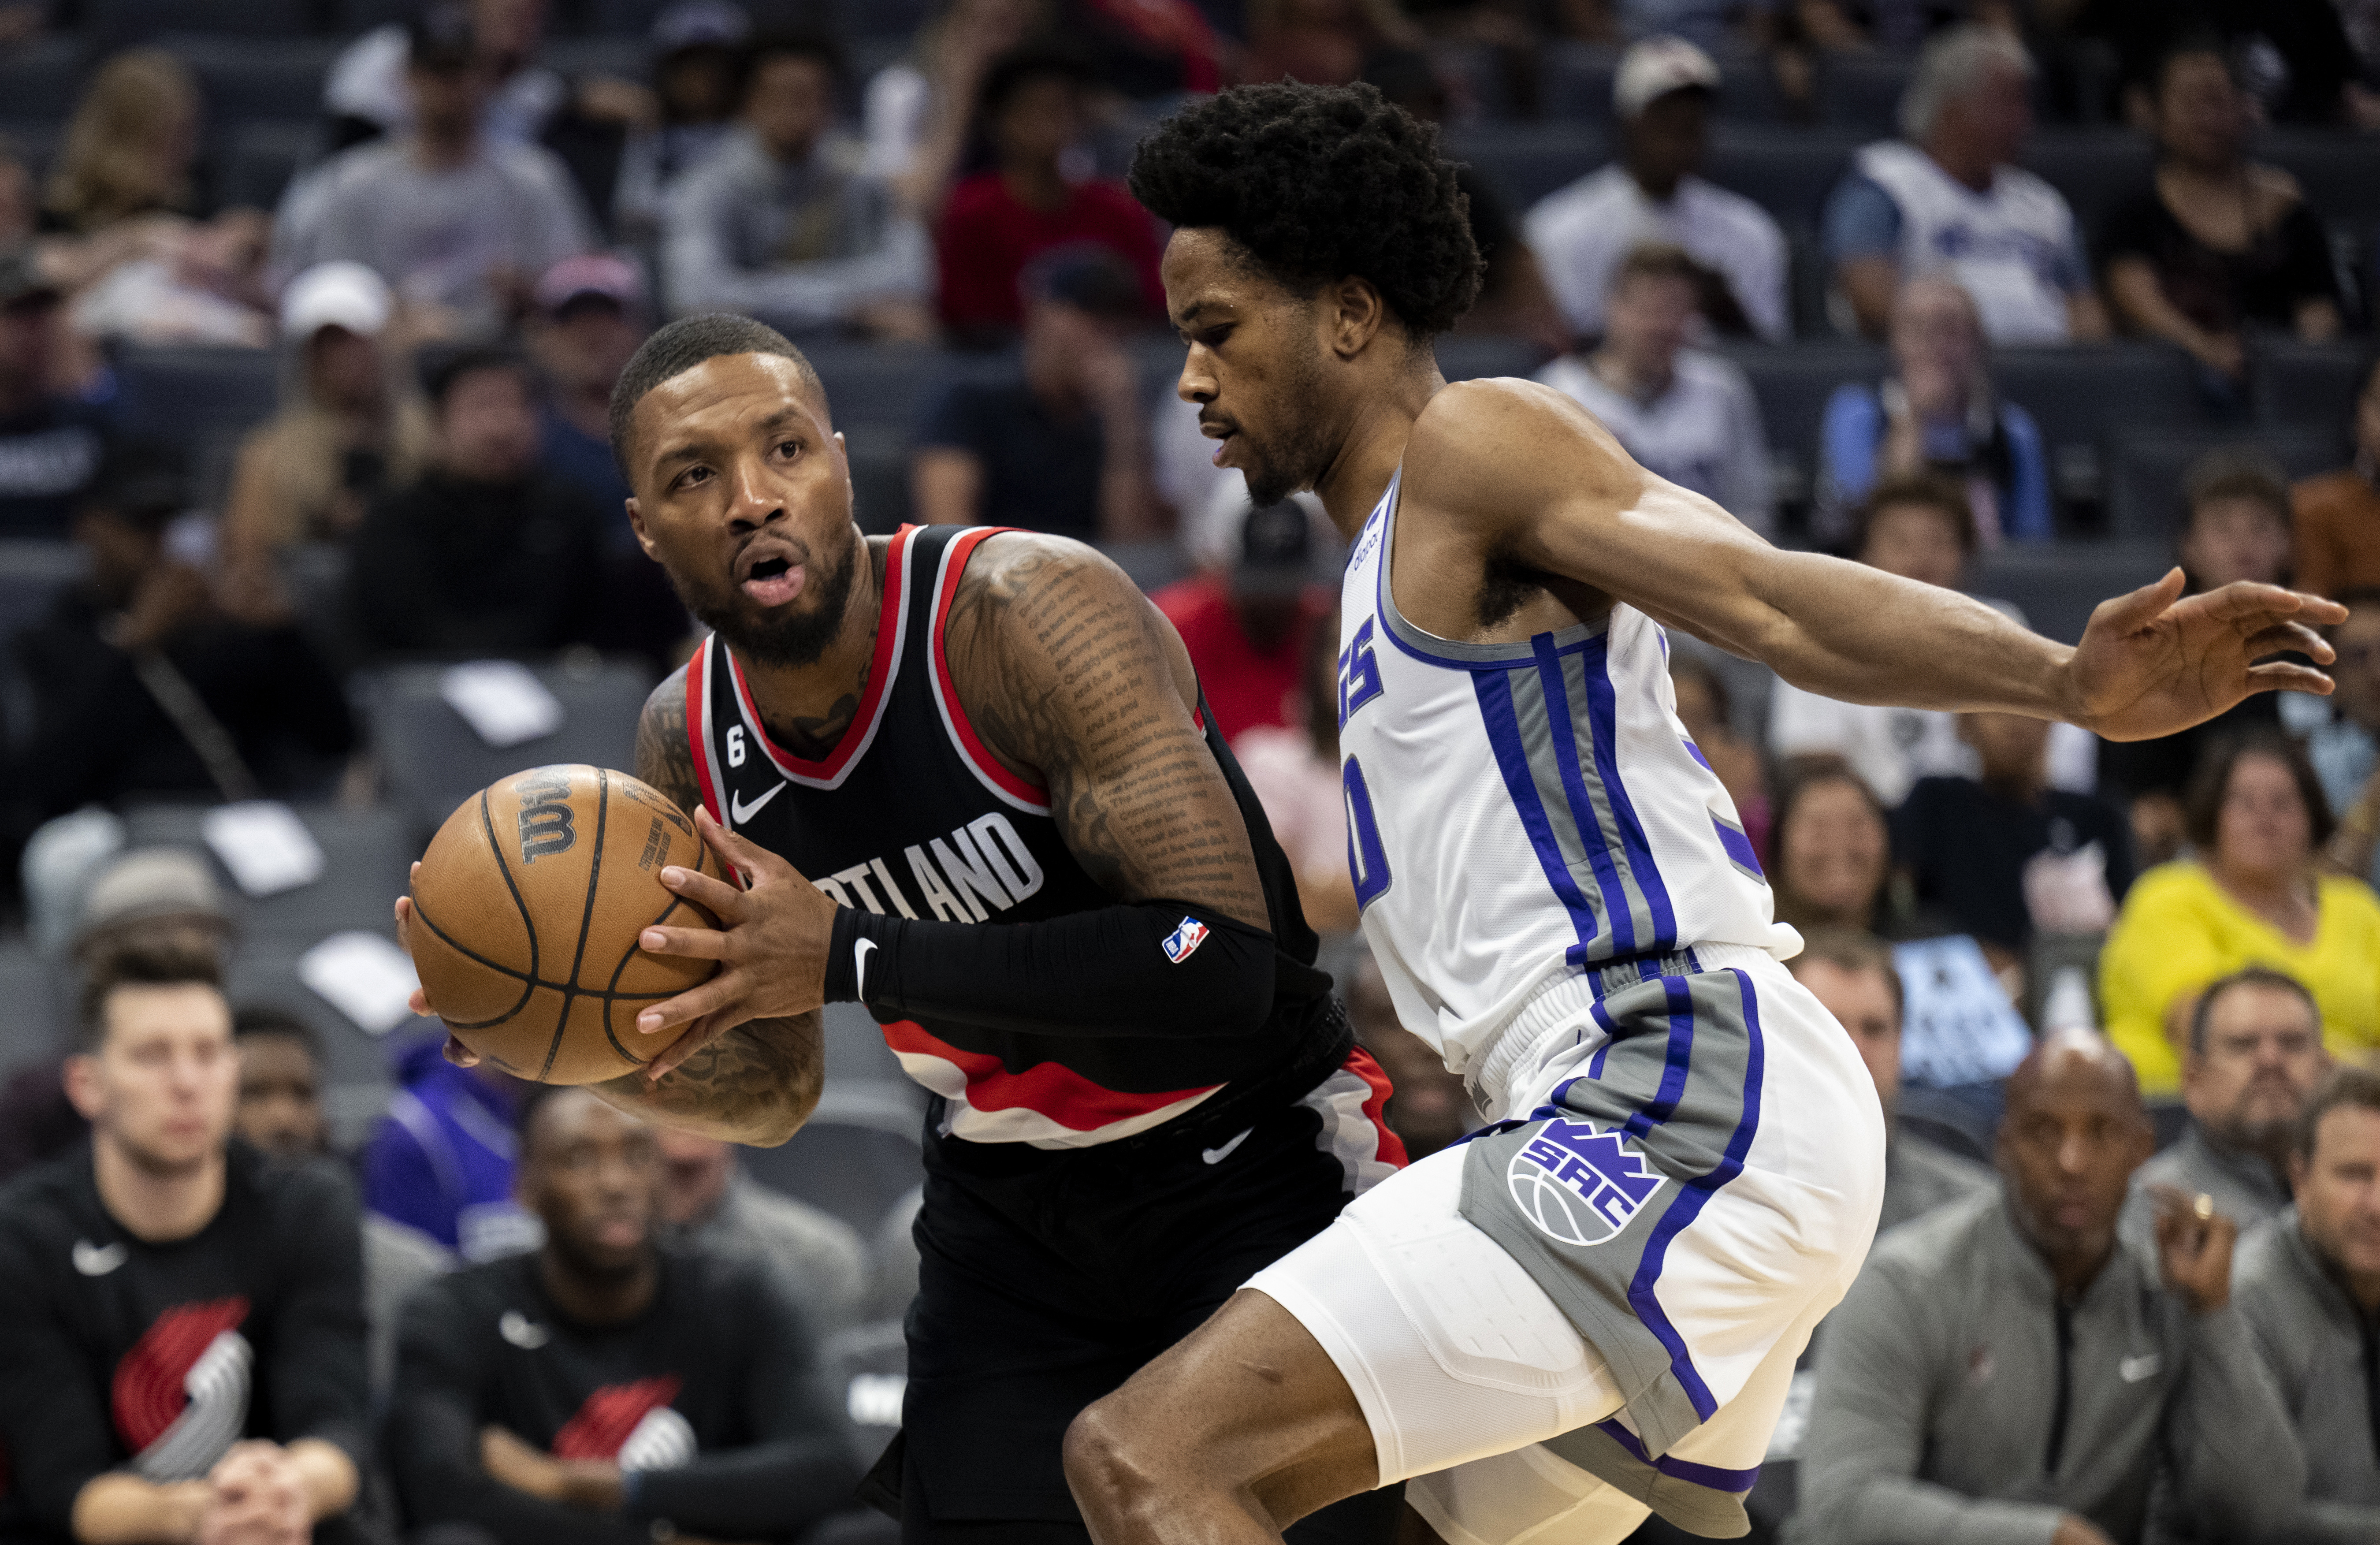 Portland Trail Blazers at Sacramento Kings Game preview, time, TV channel, how to watch free live stream online